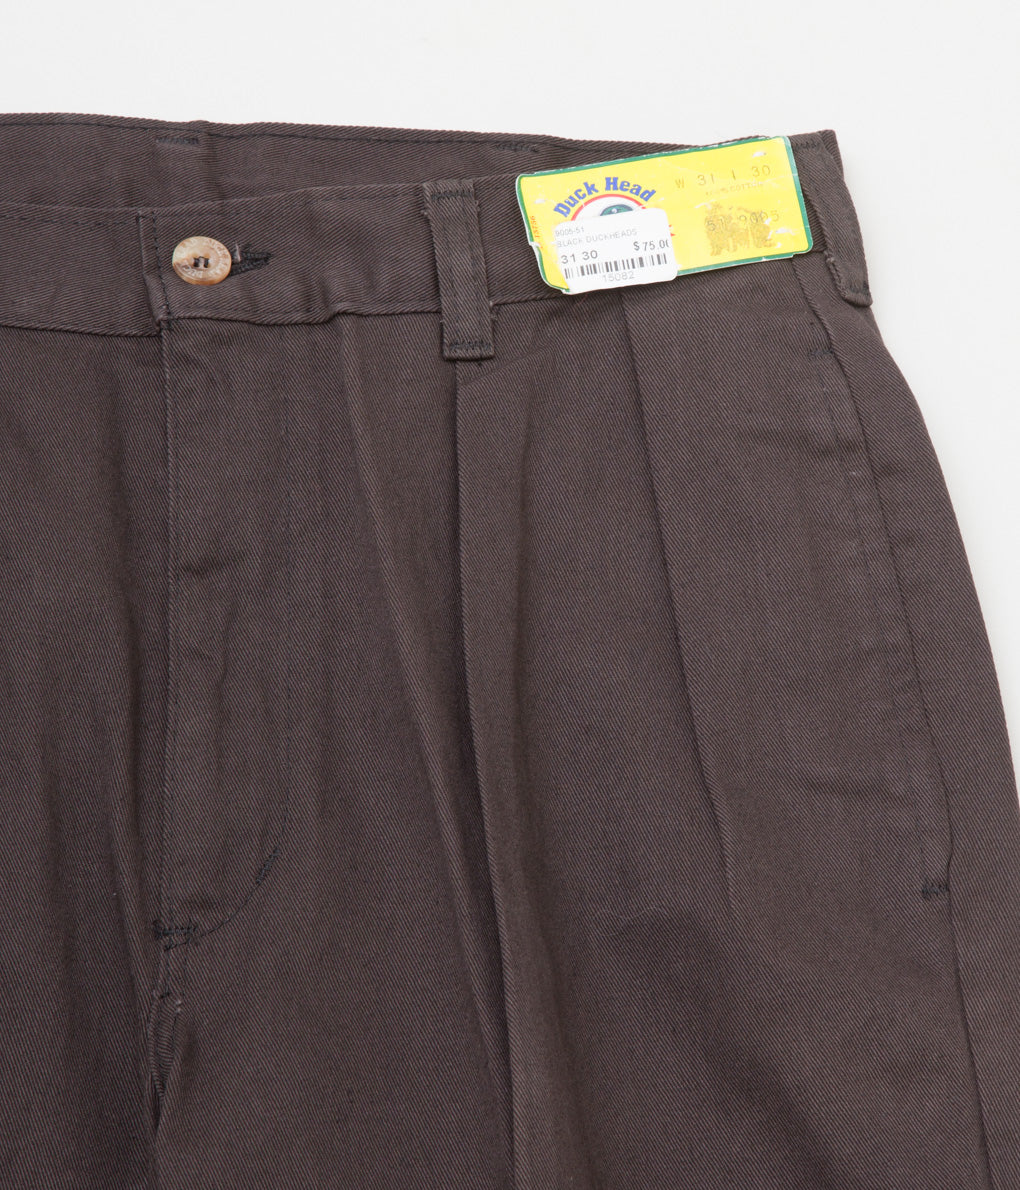 FROM USA "DUCK HEAD TWILL PANTS"(BROWN)